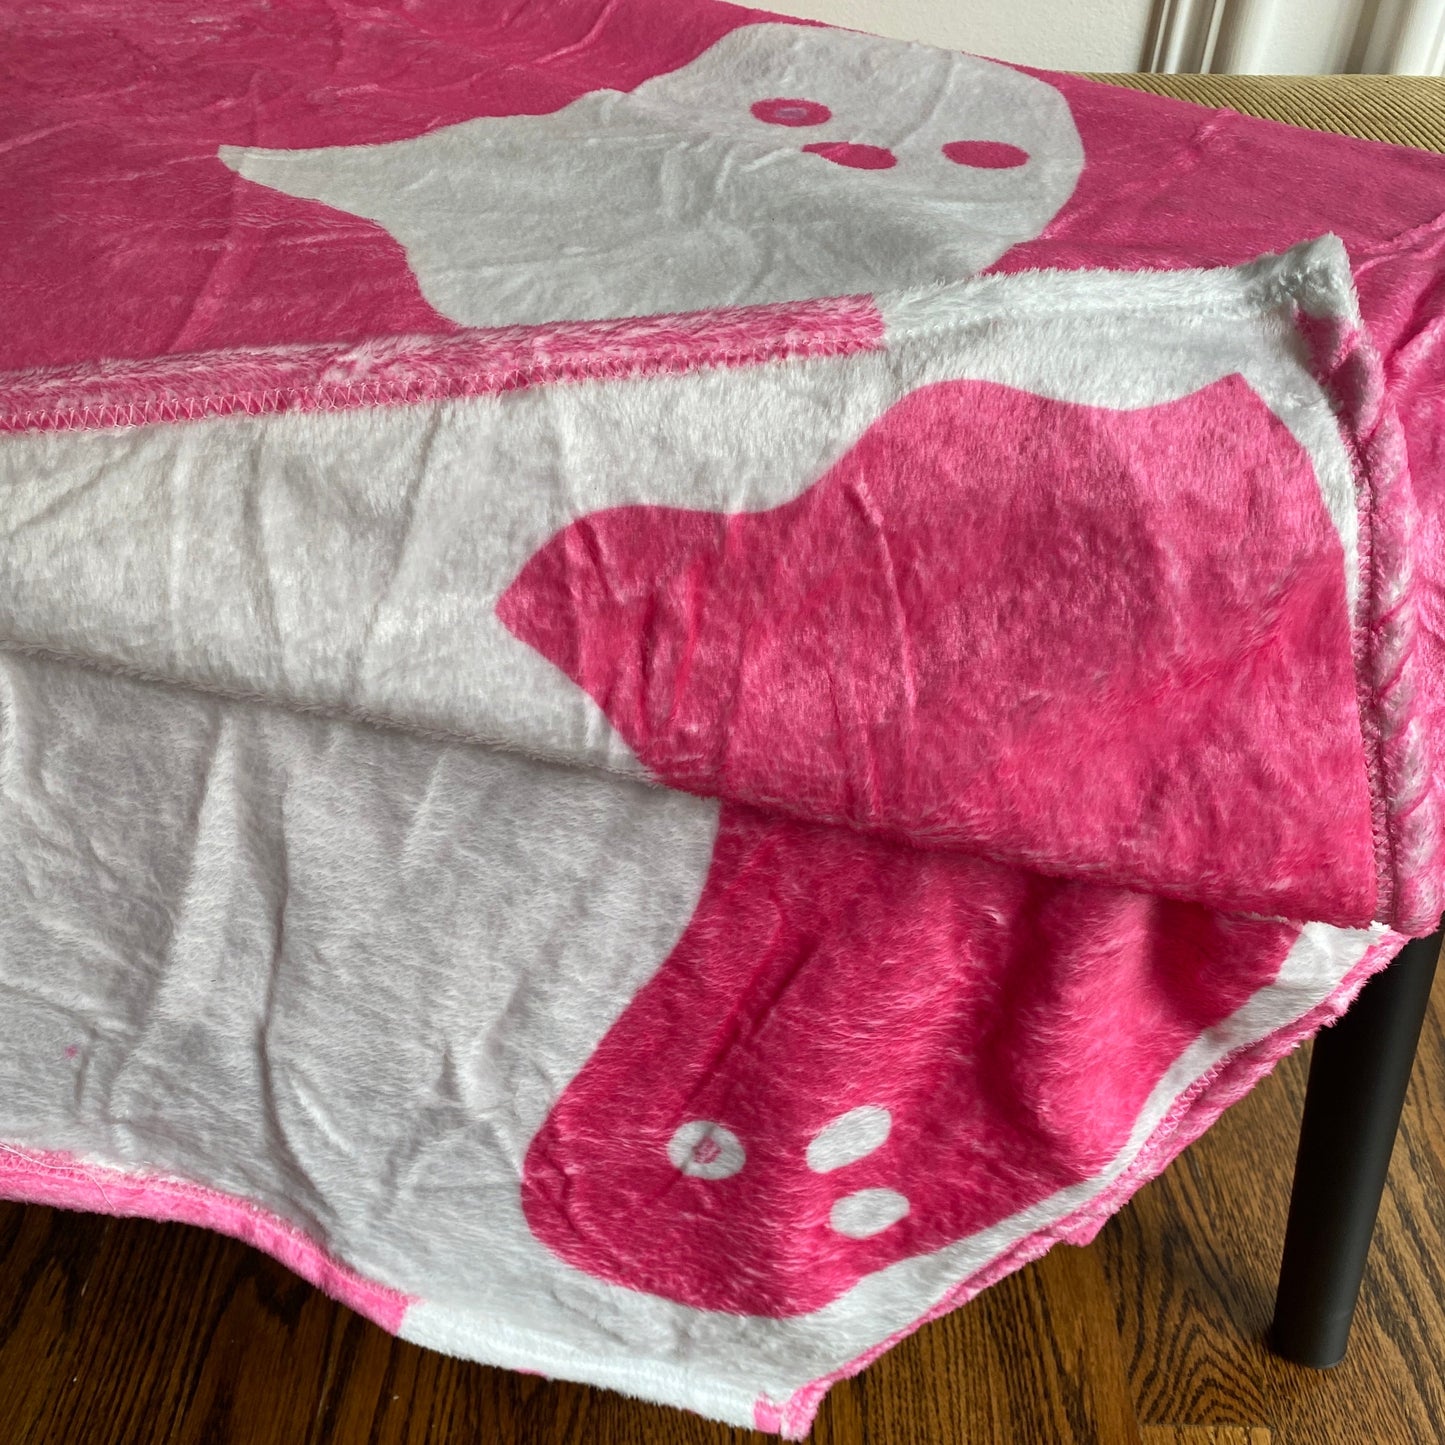 Blanket - Halloween - Double Sided Ghosts Pink & White